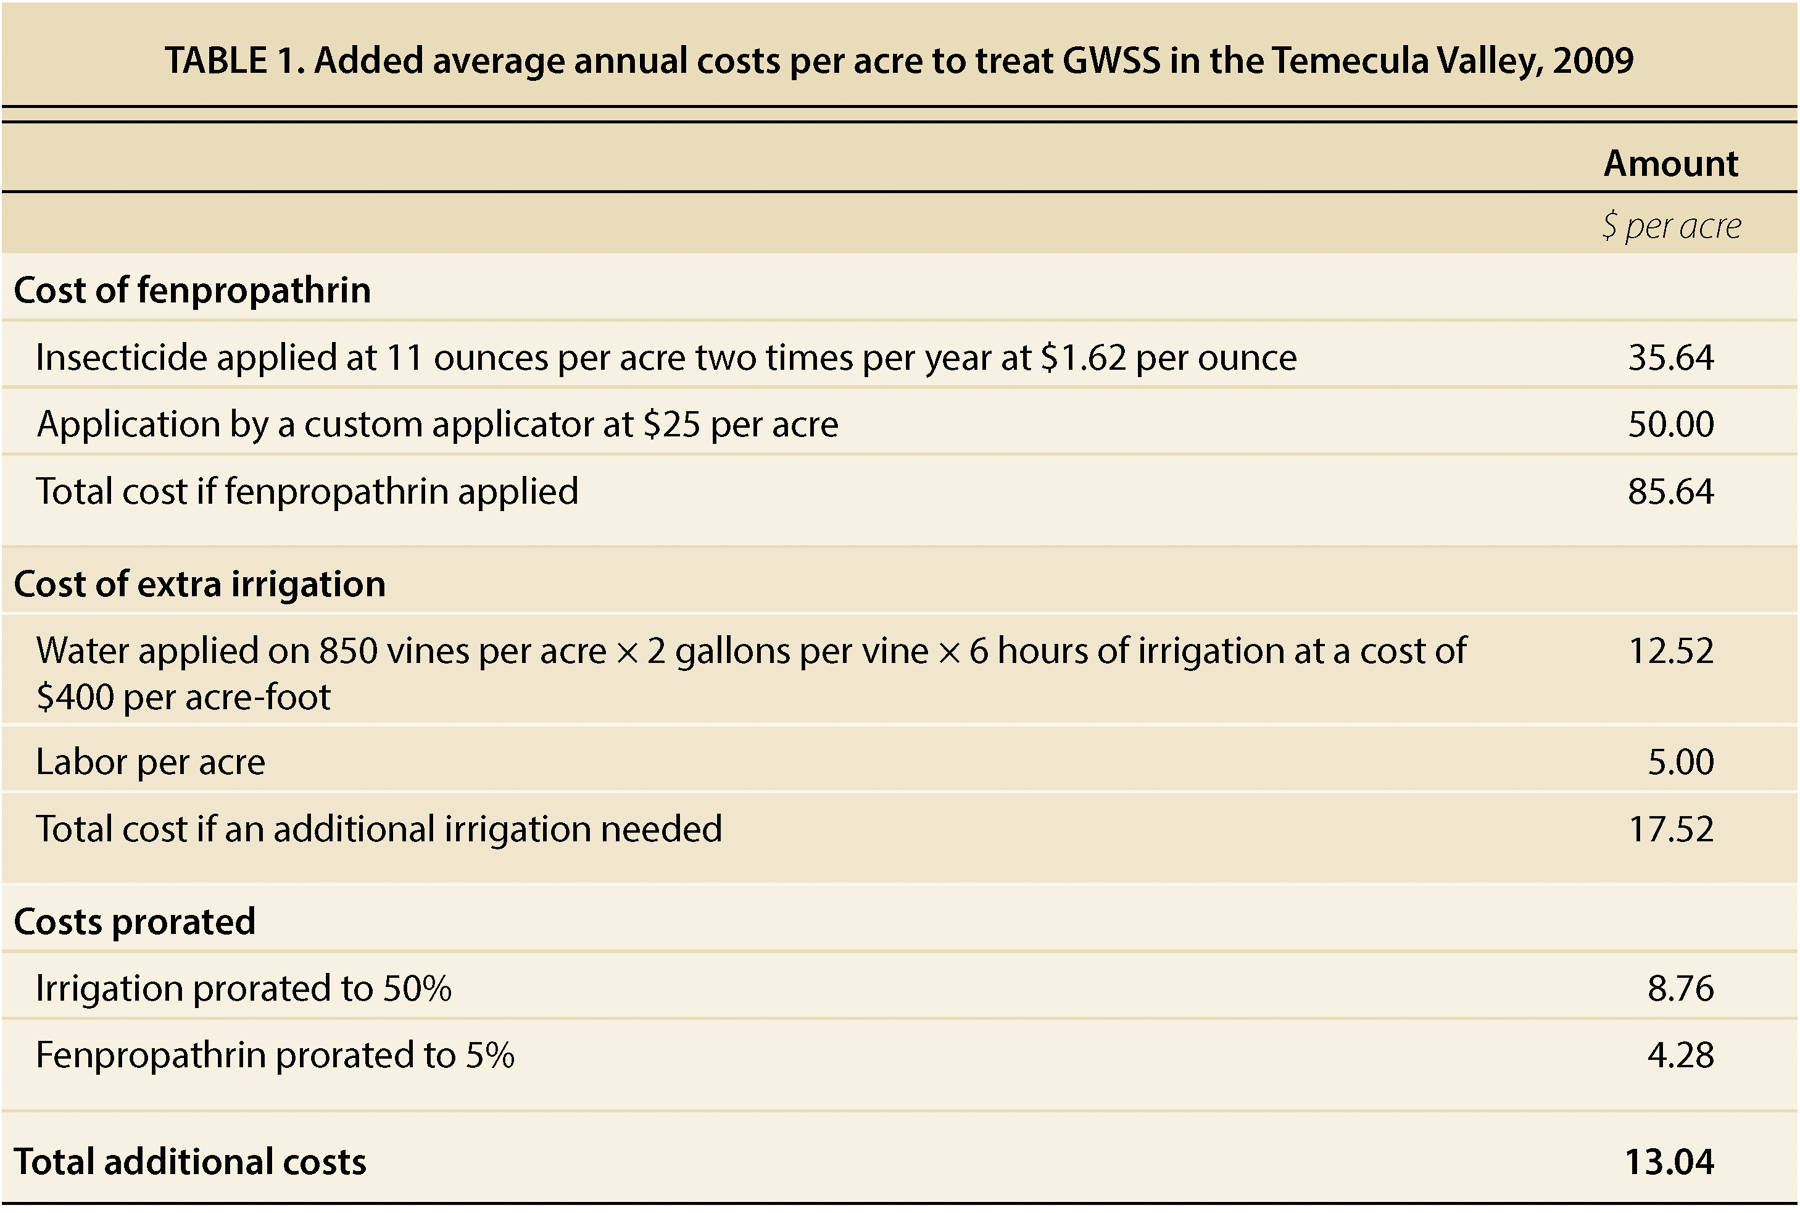 Added average annual costs per acre to treat GWSS in the Temecula Valley, 2009